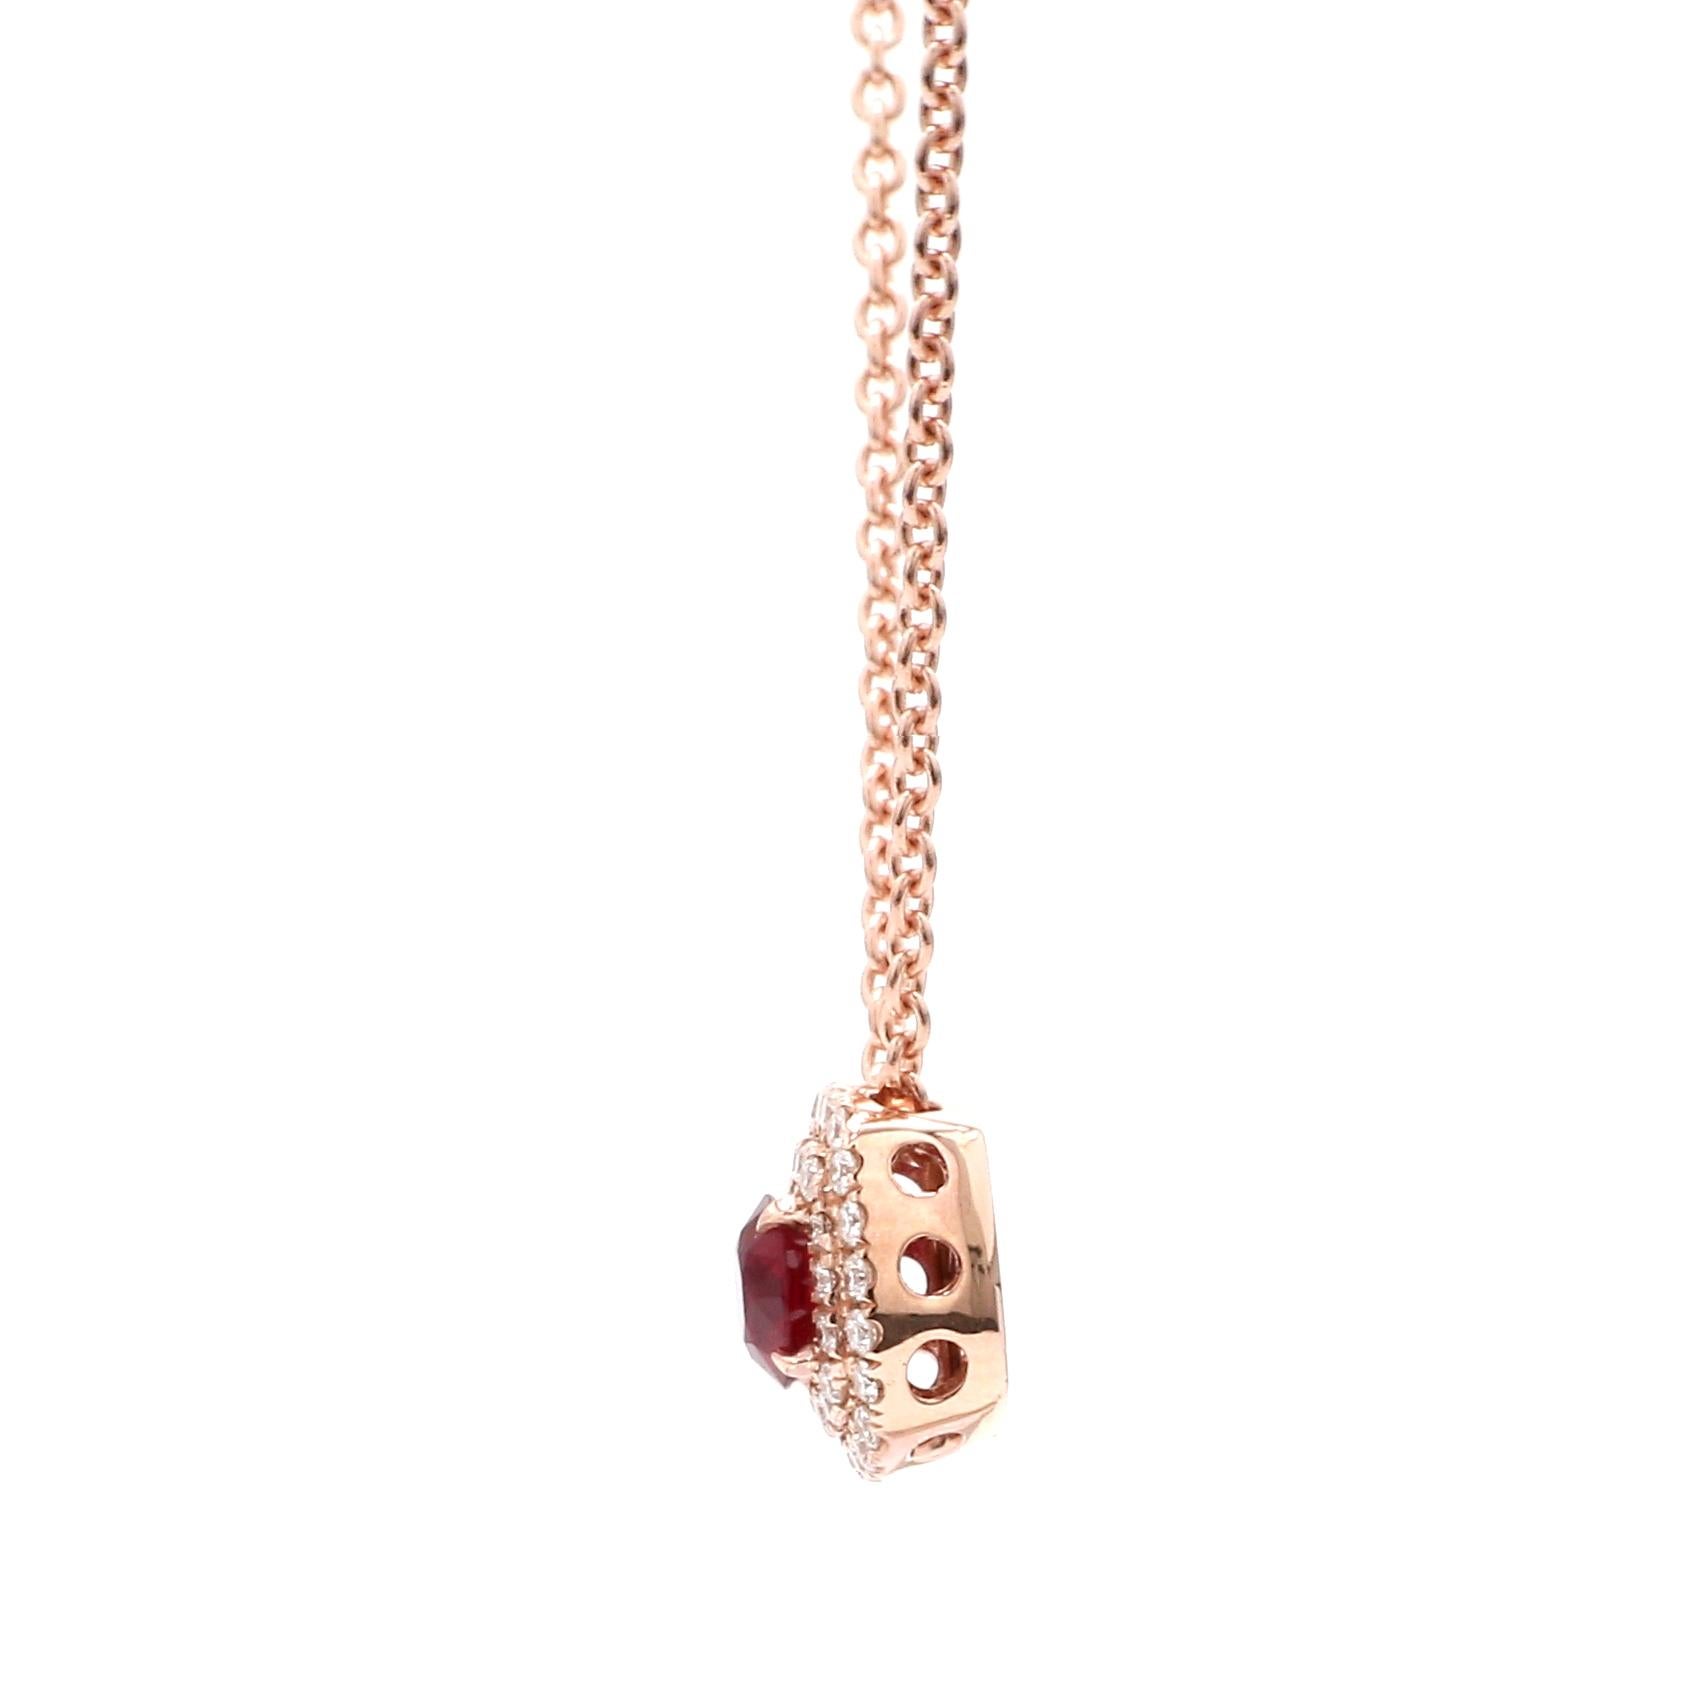 A Beautiful Handcrafted Necklace in 18 Karat Pink Gold with Natural & Ethically Mined Mozambique No Heat Diamond Cut Ruby in a Double Halo Diamond Necklace with 18